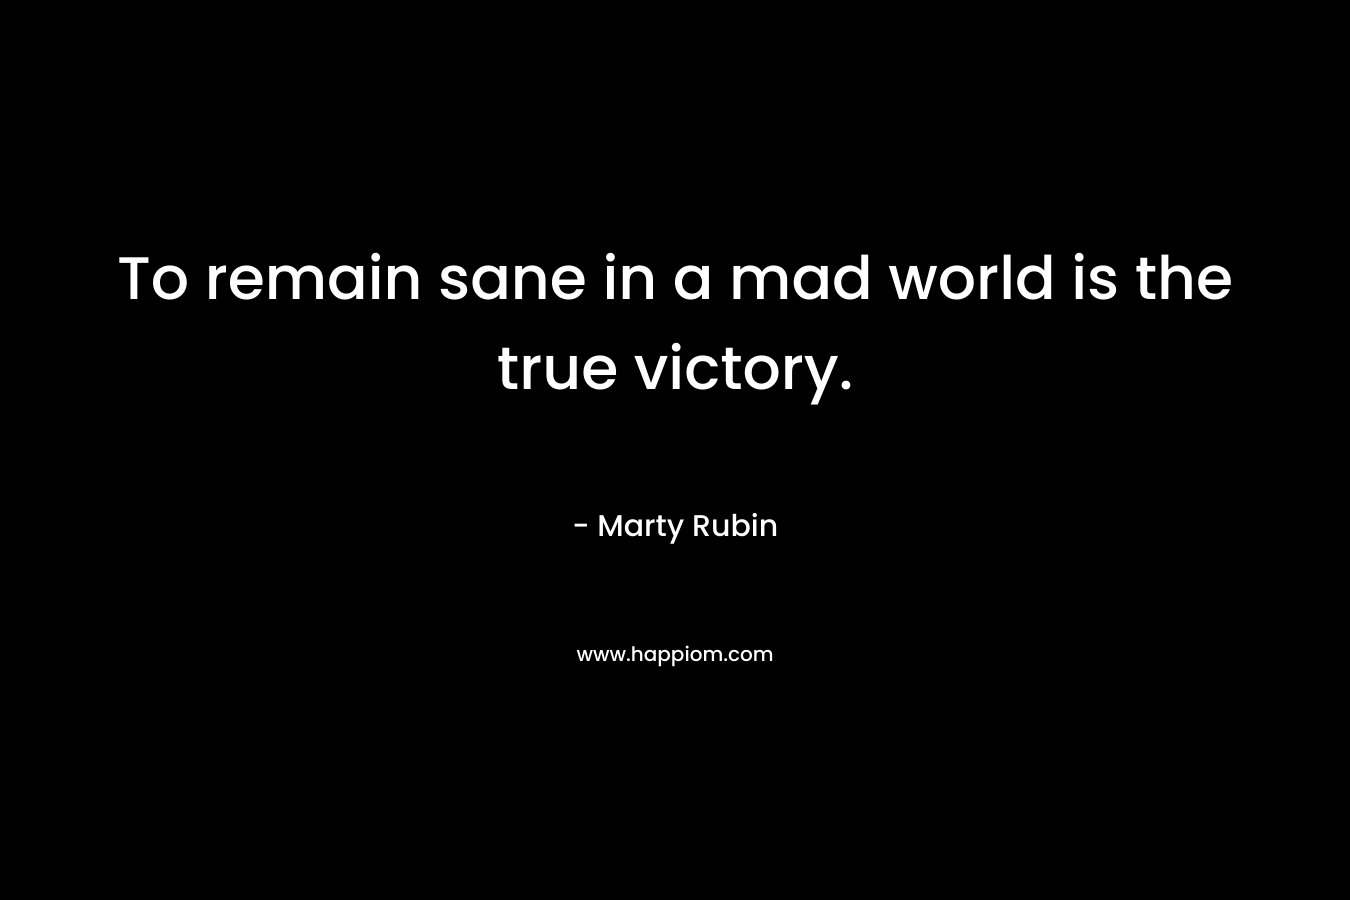 To remain sane in a mad world is the true victory. – Marty Rubin